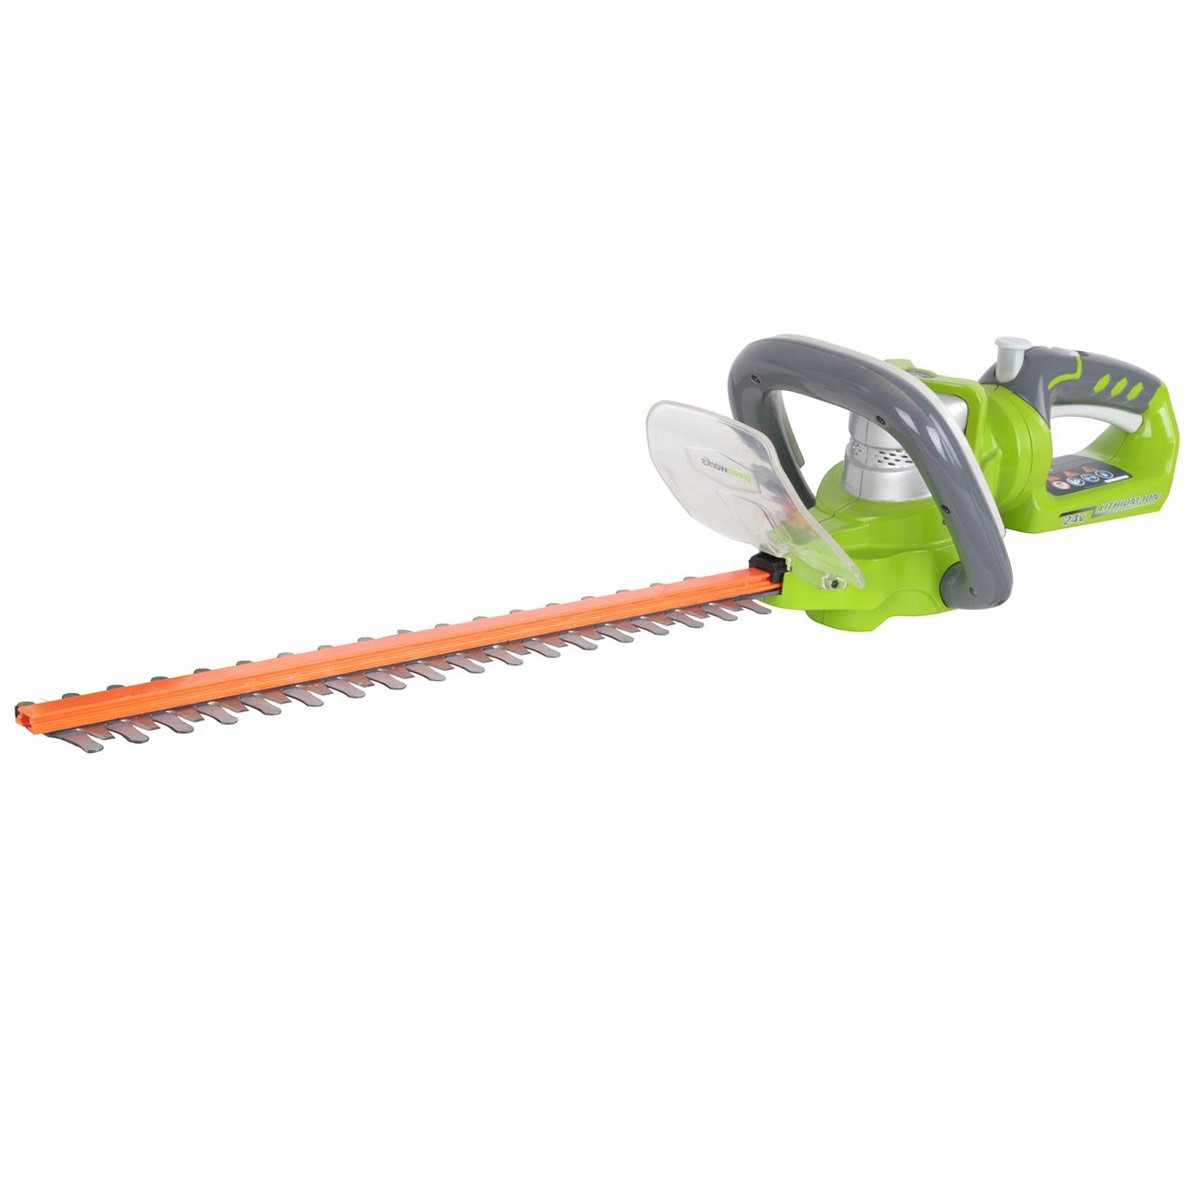 Greenworks 24v Cordless Hedge Trimmer with Twist Handle (22137AT)